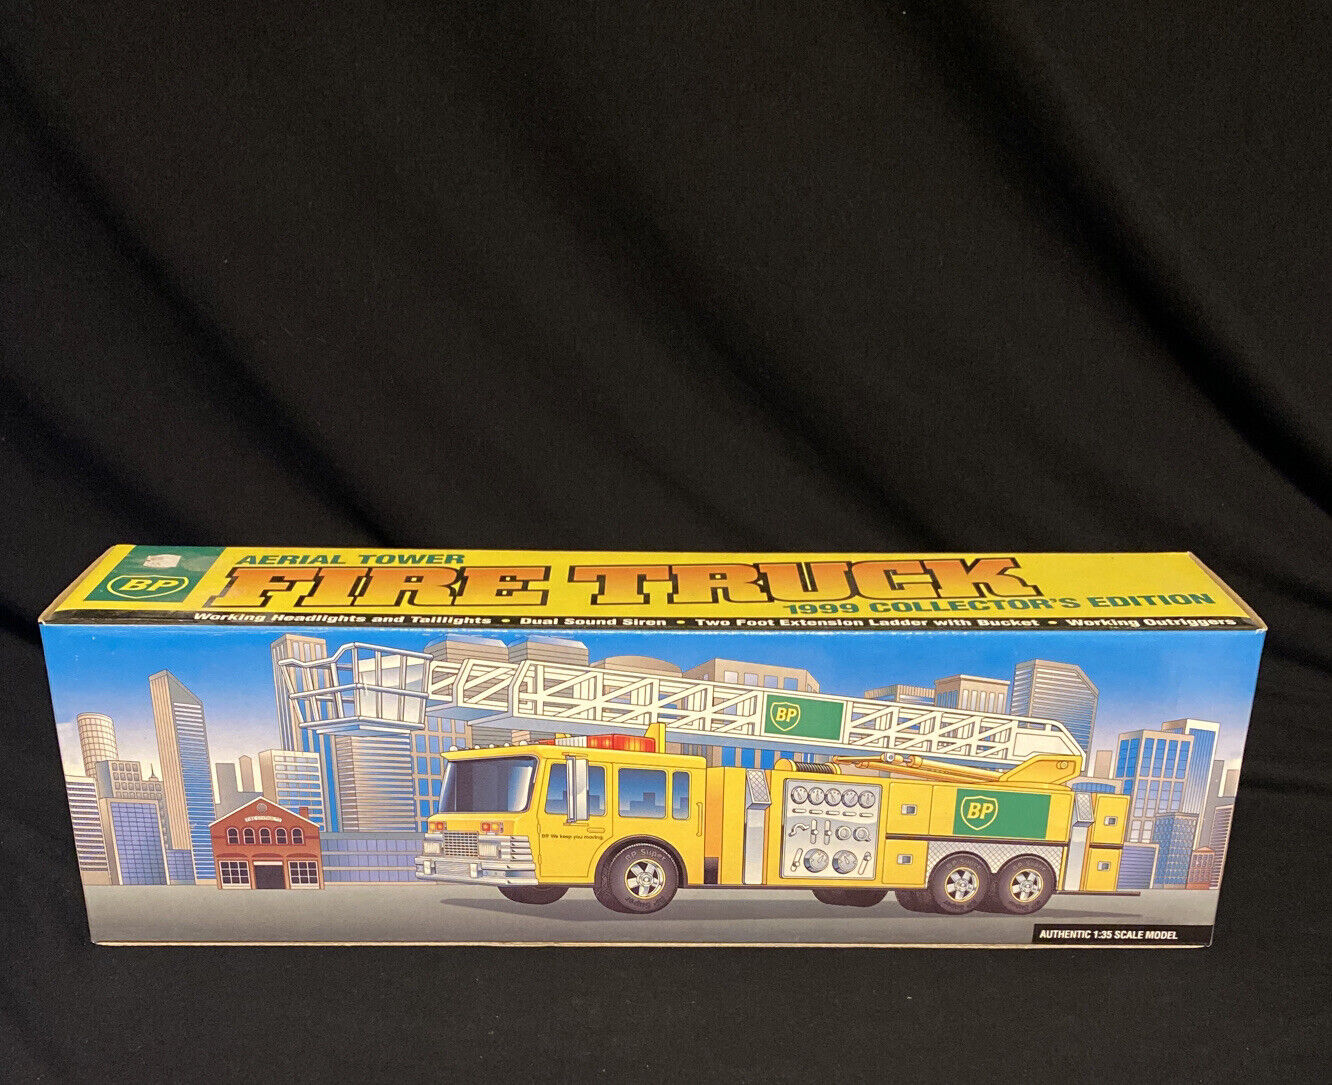 Bp 1999 Aerial Tower Toy Fire Truck 1:35, New In Box